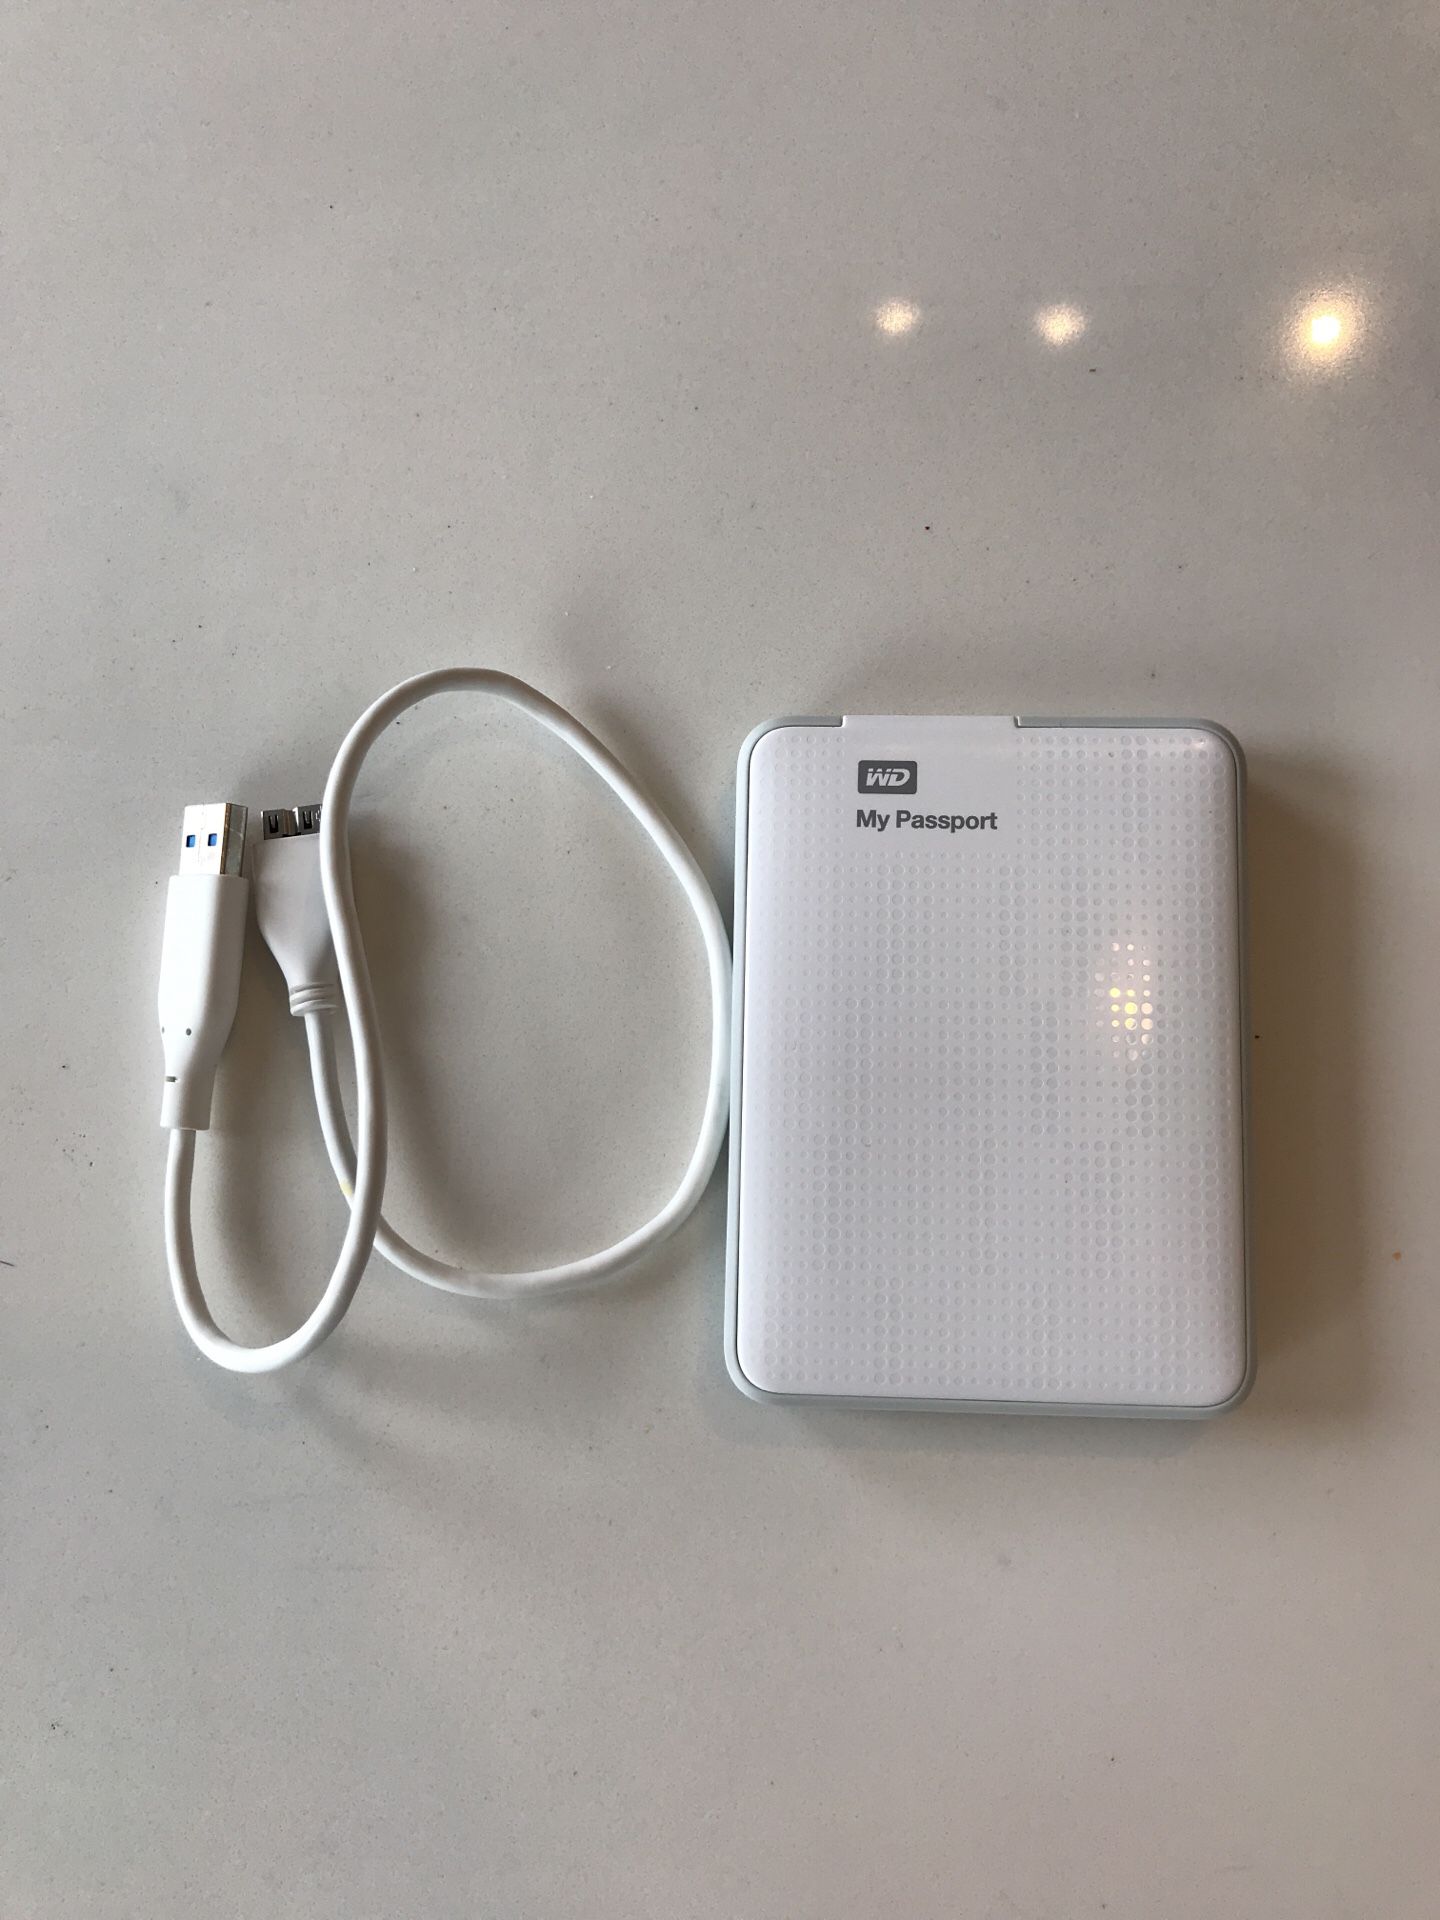 External Portable Hard Drive (500GB) with Case